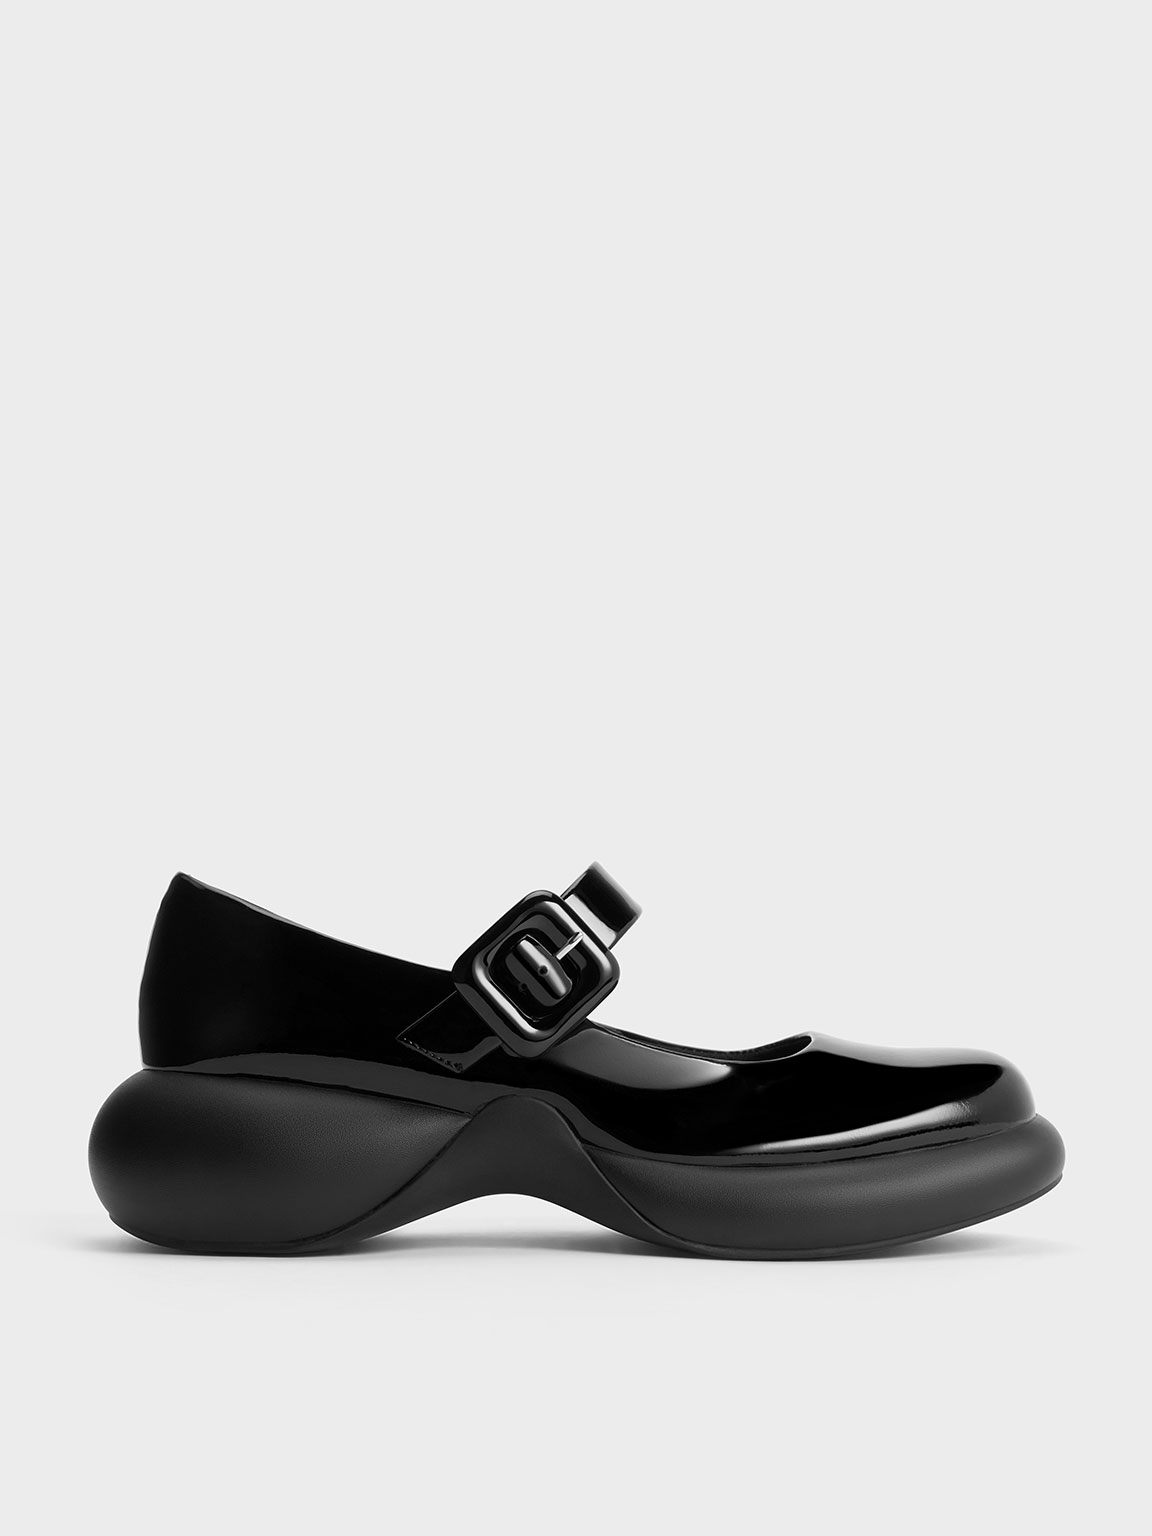 Hallie Patent Leather Mary Janes